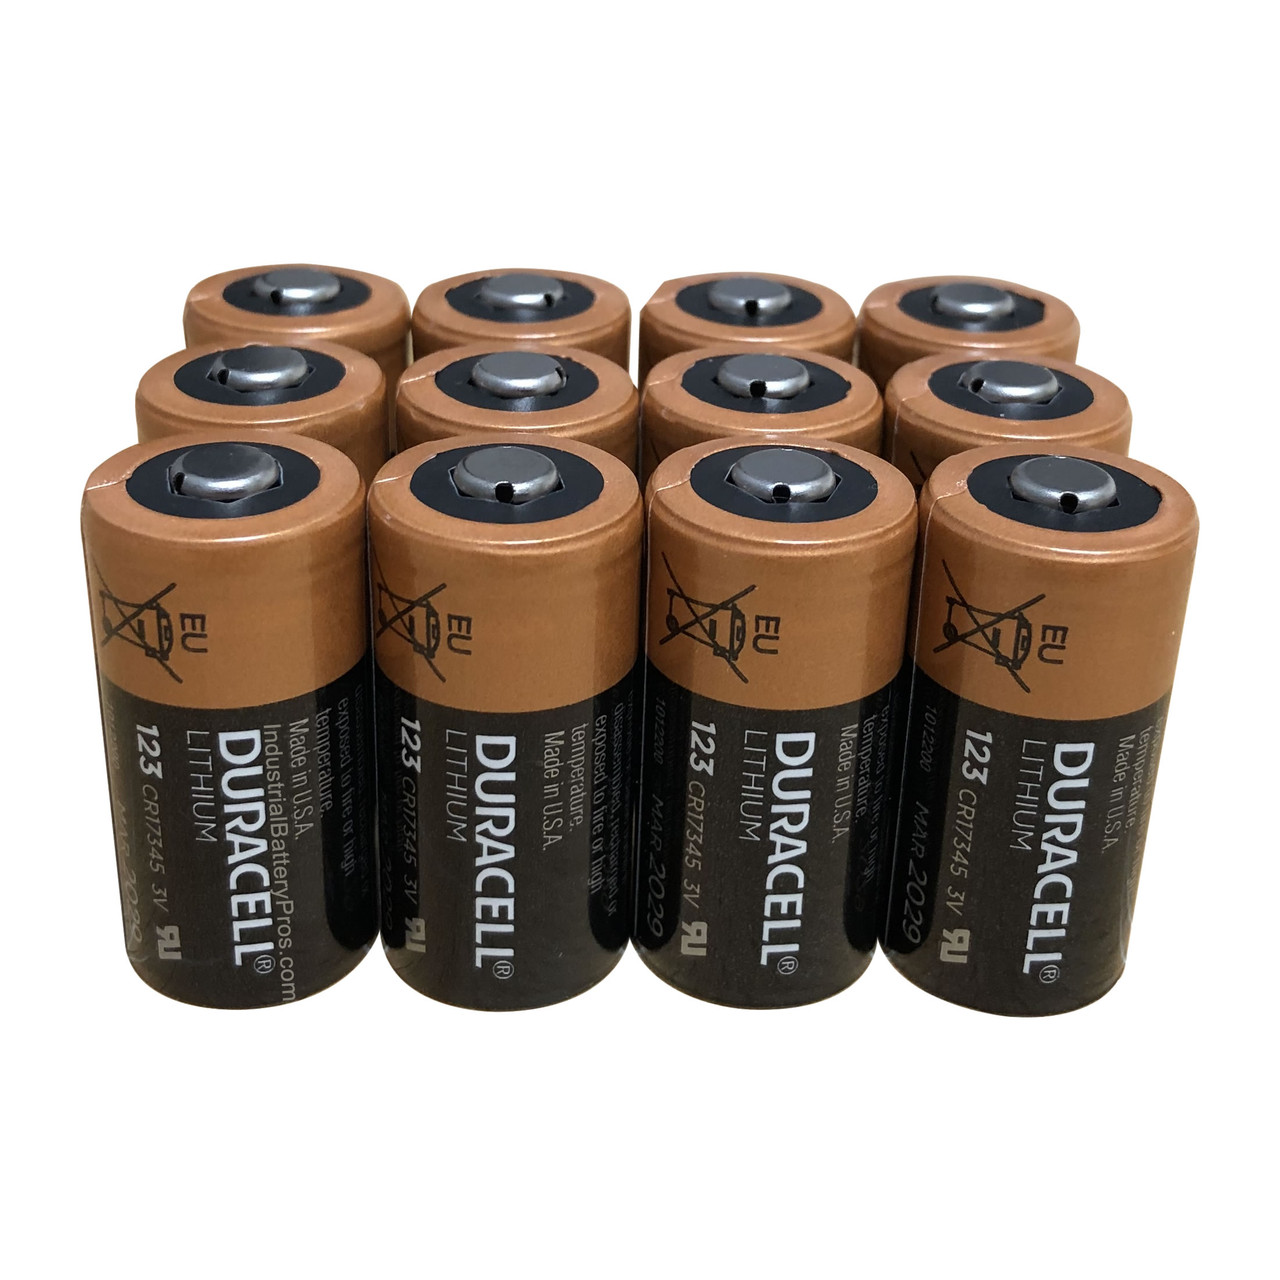 Duracell DL123 - DL123A - DL123ABPK Battery - 3V Lithium Camera Photo